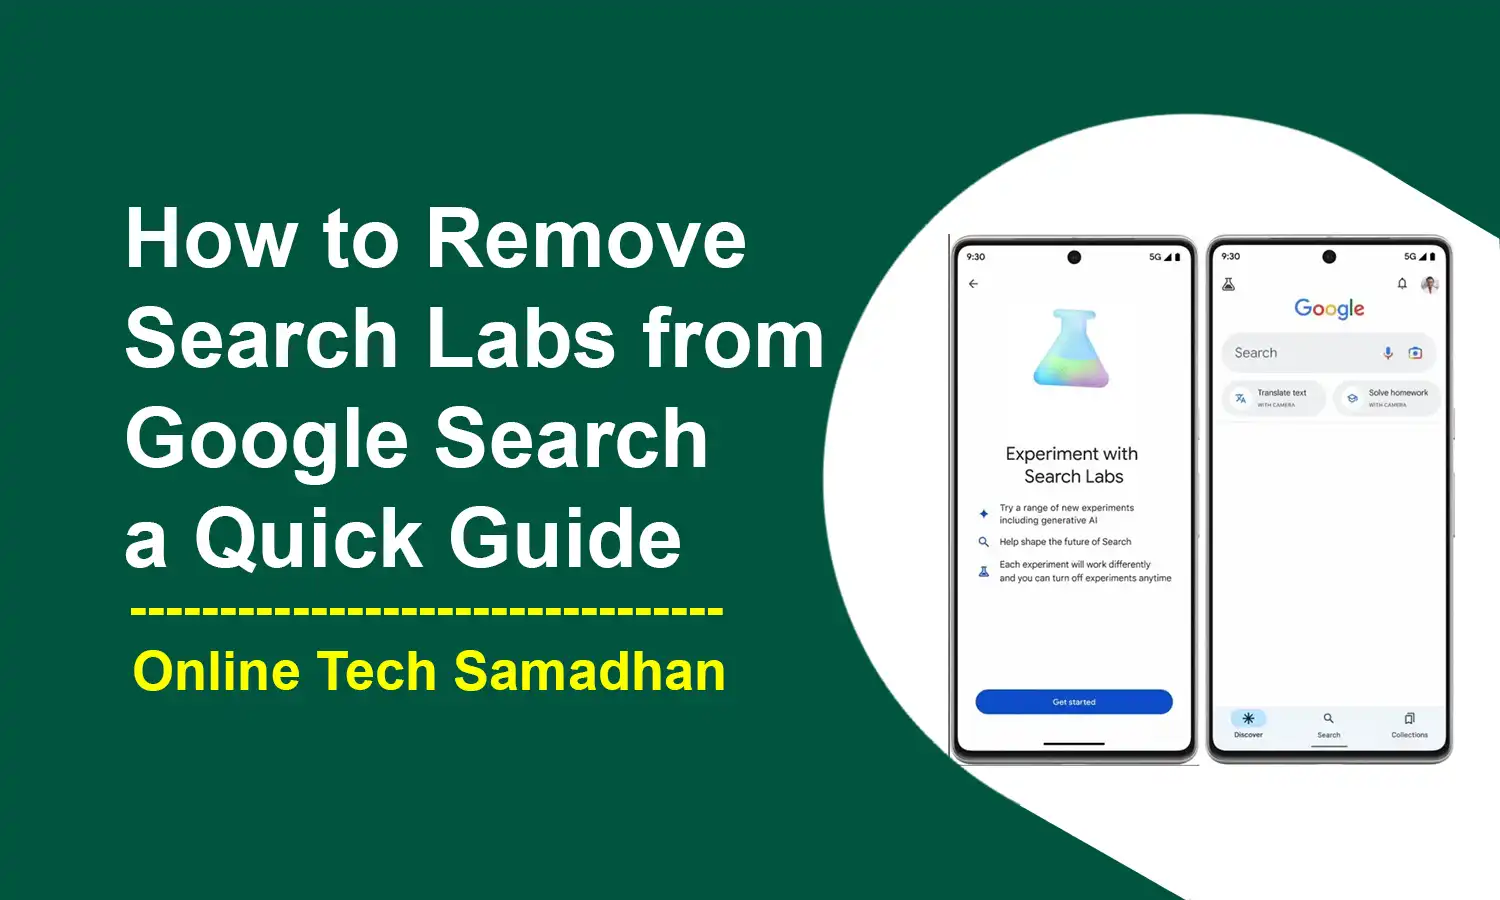 How to Remove Search Labs from Google Search